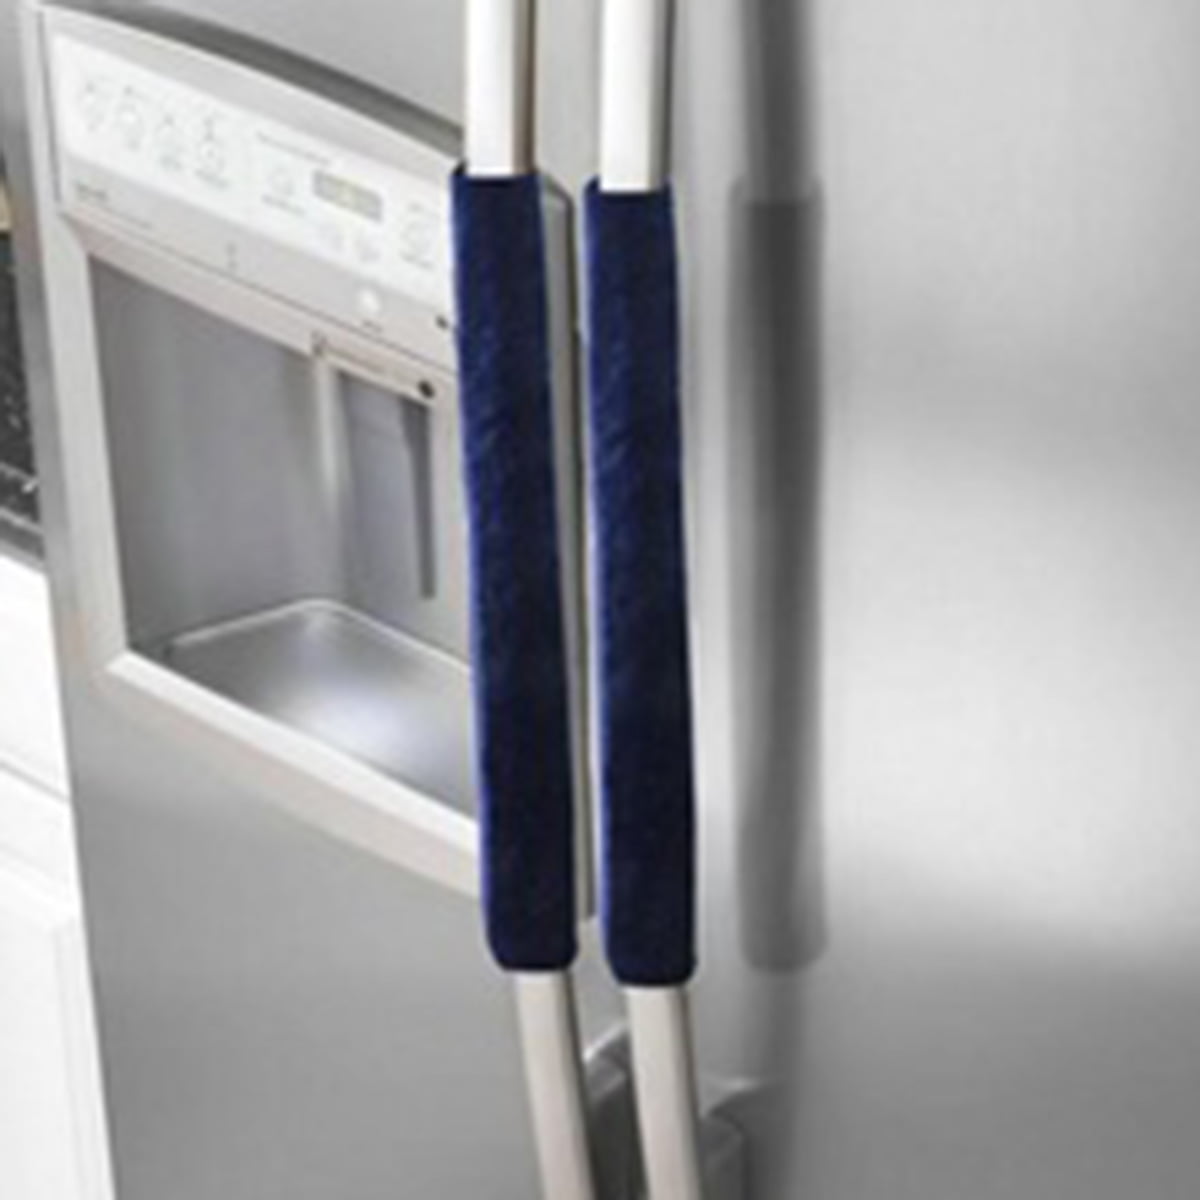 Details about   2x Refrigerator Door Protect Handle Covers Kitchen Fridge Microwave Oven Cover